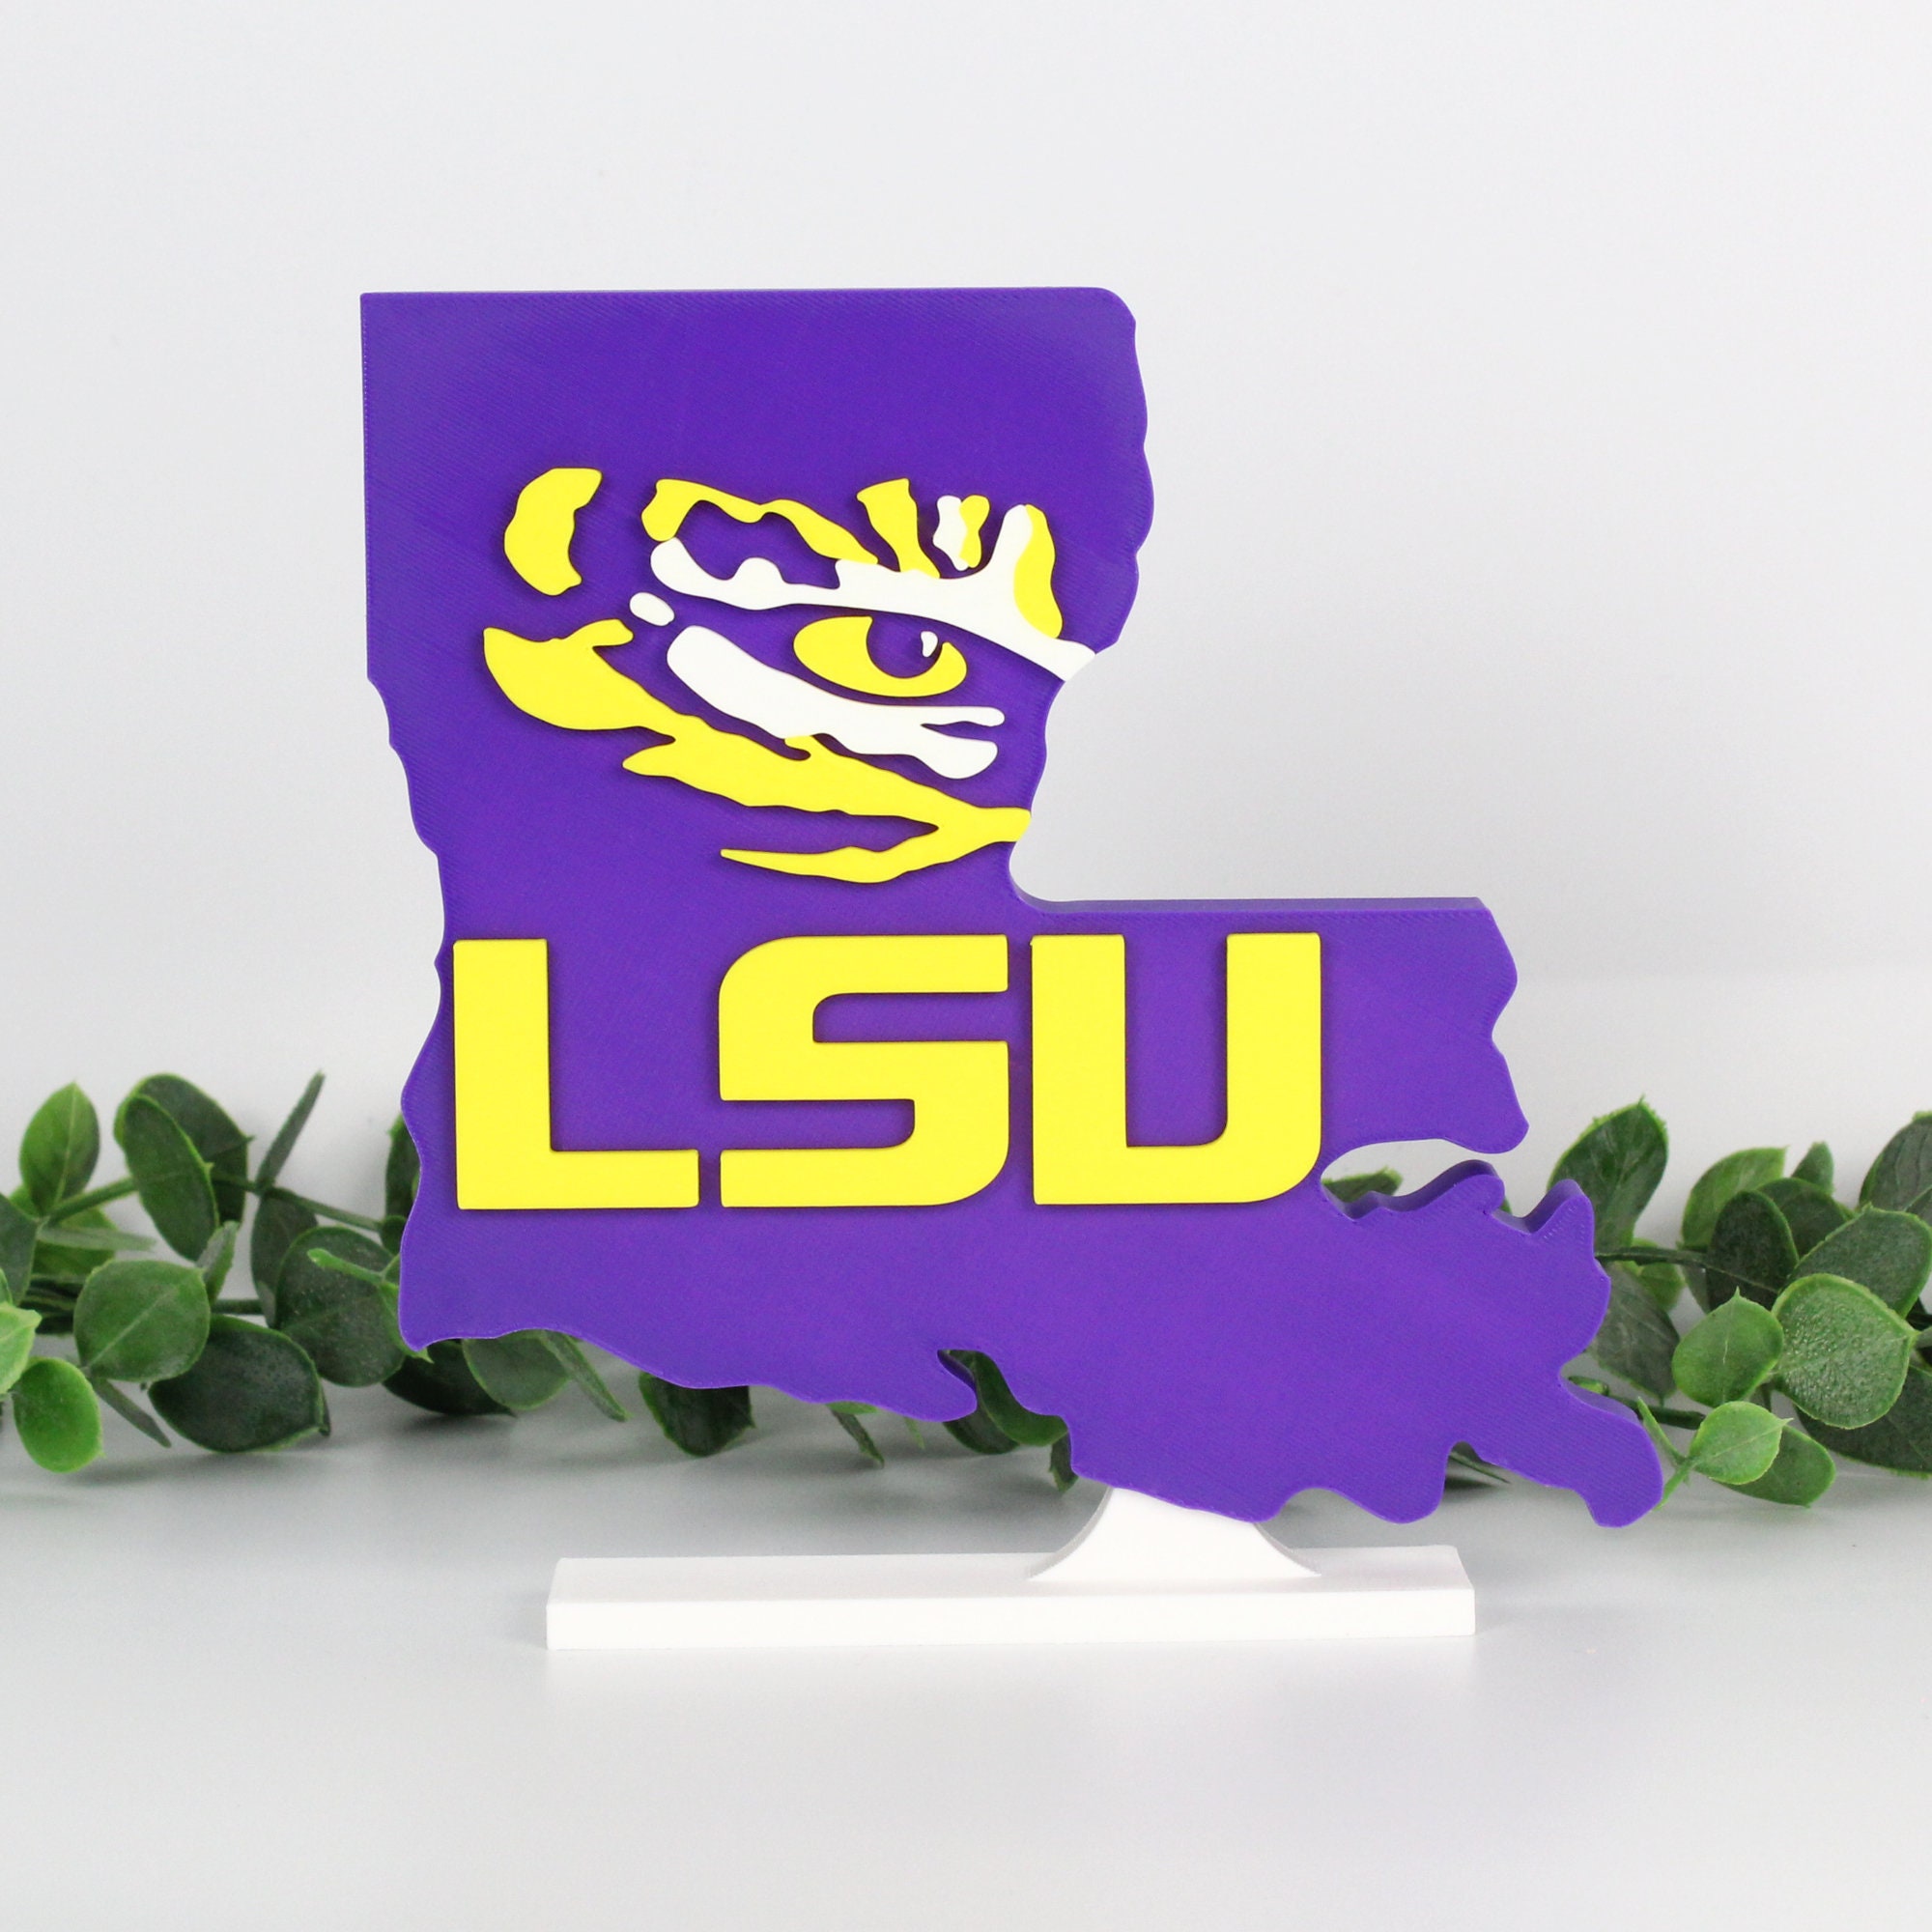 LSU Tigers and Lady Tigers Logo Athletic Teams Louisiana State University Edible  Cake Topper Image ABPID00414